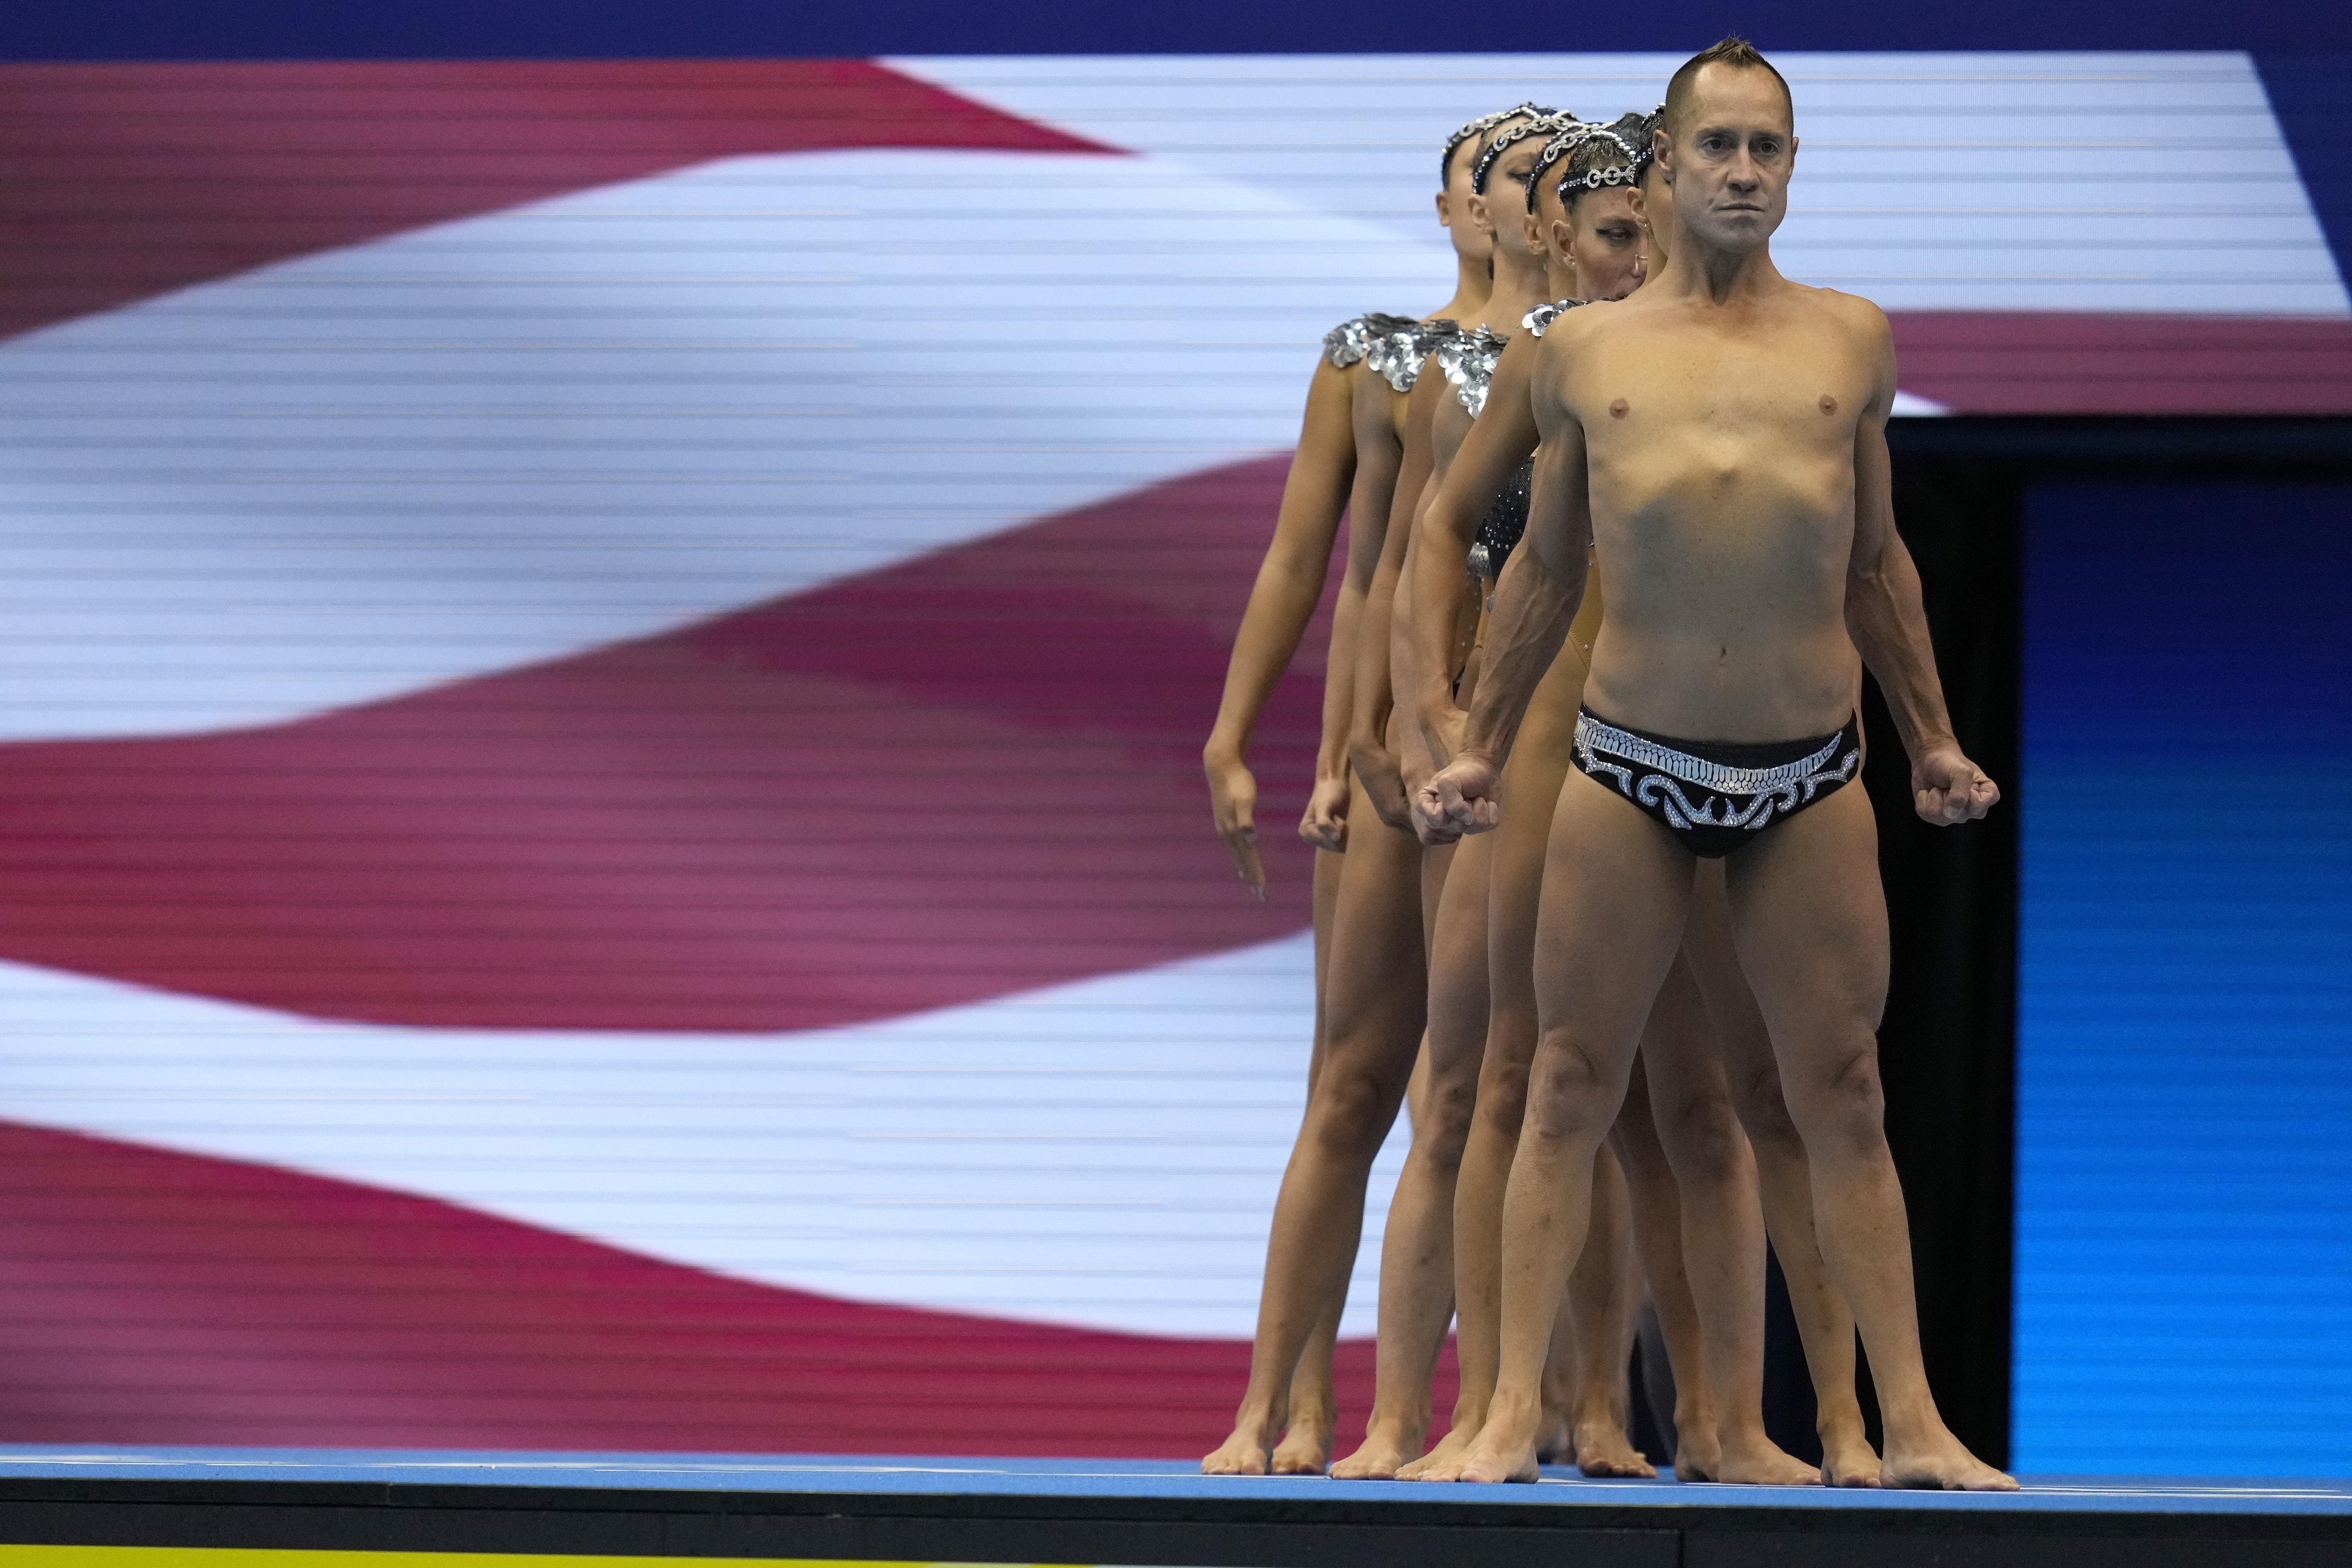 Bill May, front, leads the United States team out to compete in the team acrobatic of artistic swimming at the World Swimming Championships in Fukuoka, Japan, Saturday, July 15, 2023. Largely unnoticed by the general public, men have been participating in artistic swimming, formerly known as synchronized swimming, for decades. (AP Photo/Nick Didlick)